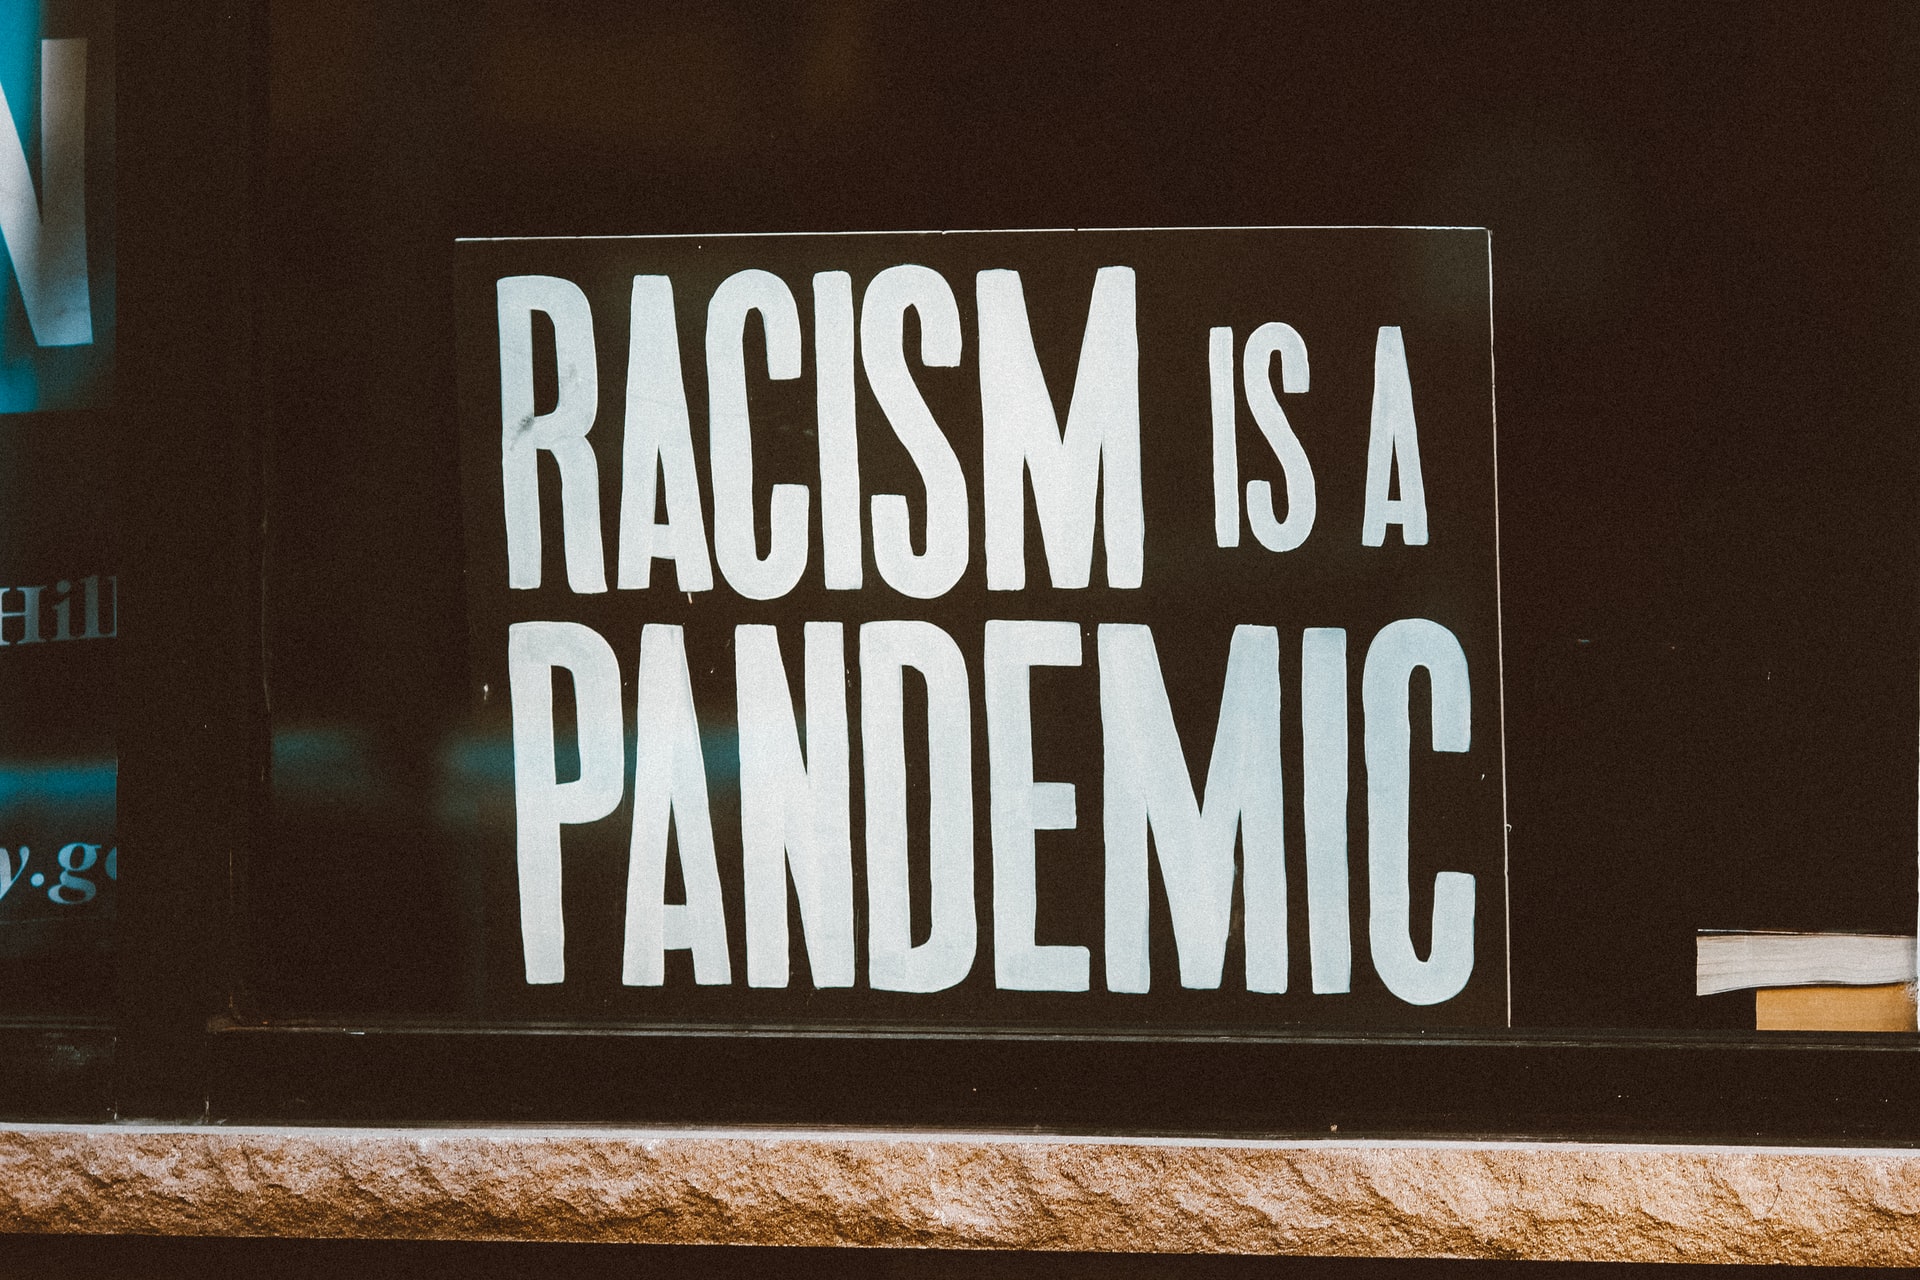 Image shows a black sign with white letters stating "Racism is a pandemic" in capital letters.